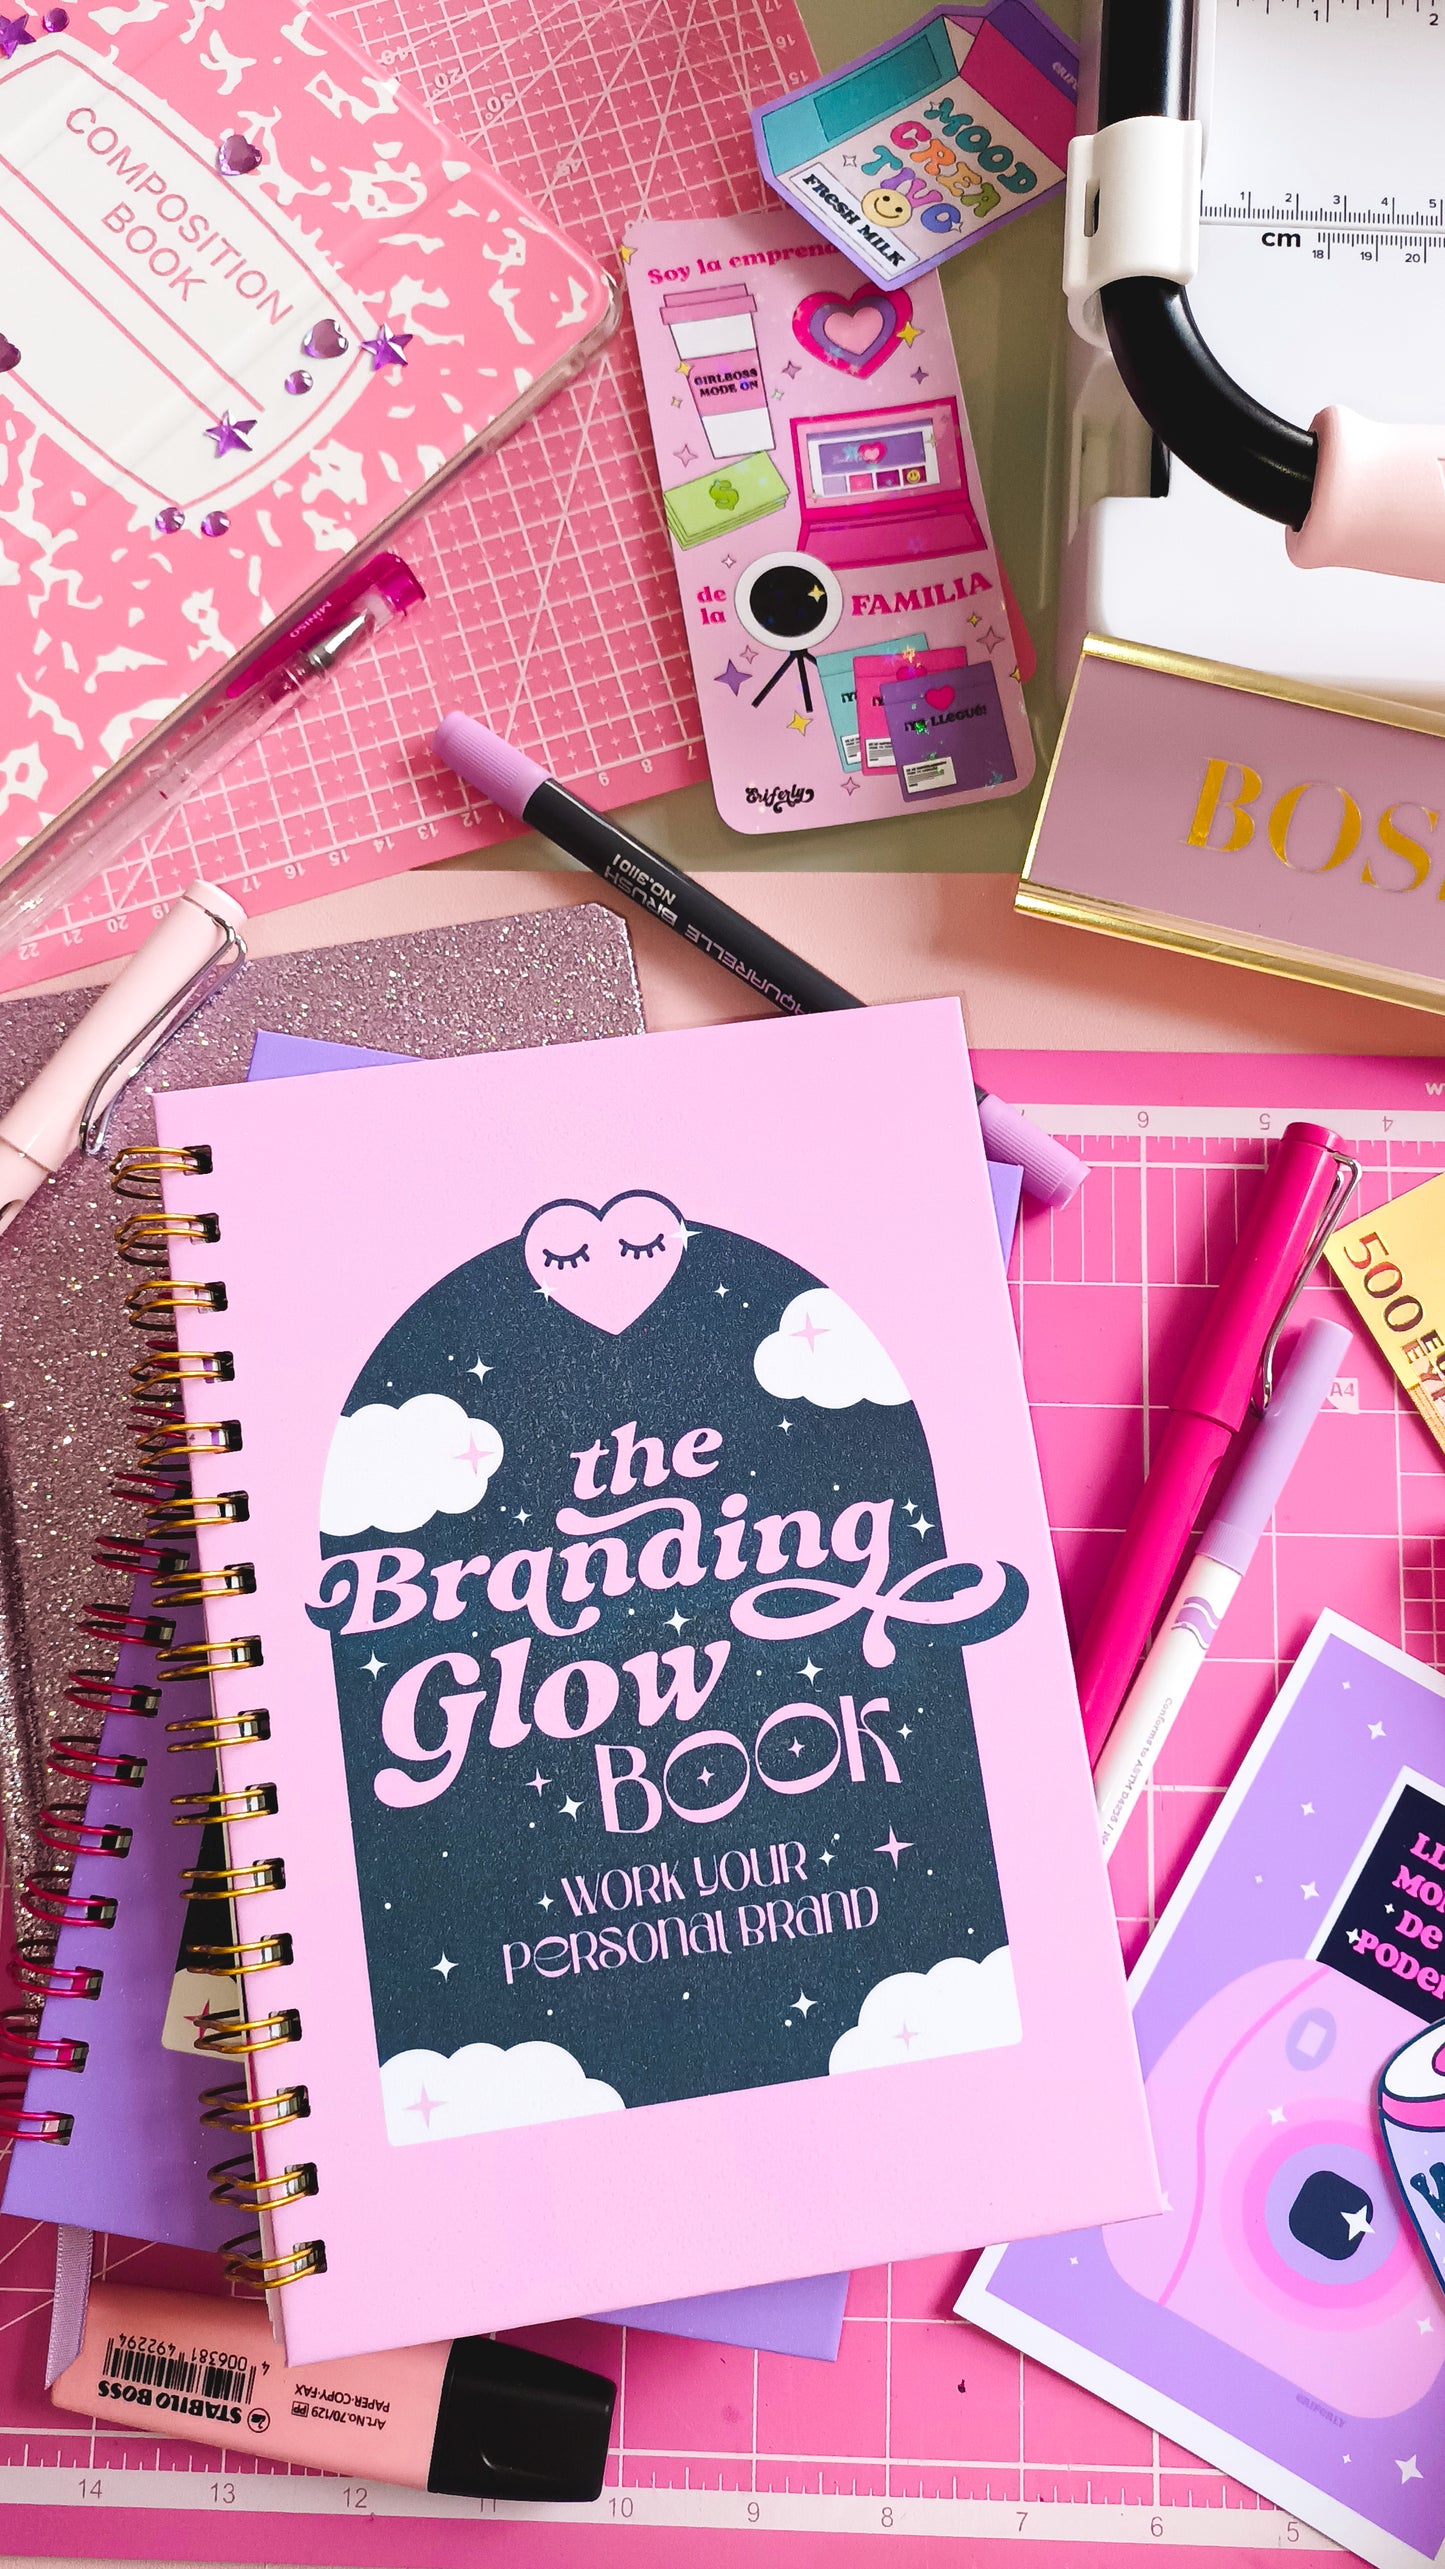 THE BRANDING GLOW BOOK: Work your personal brand 💜✨